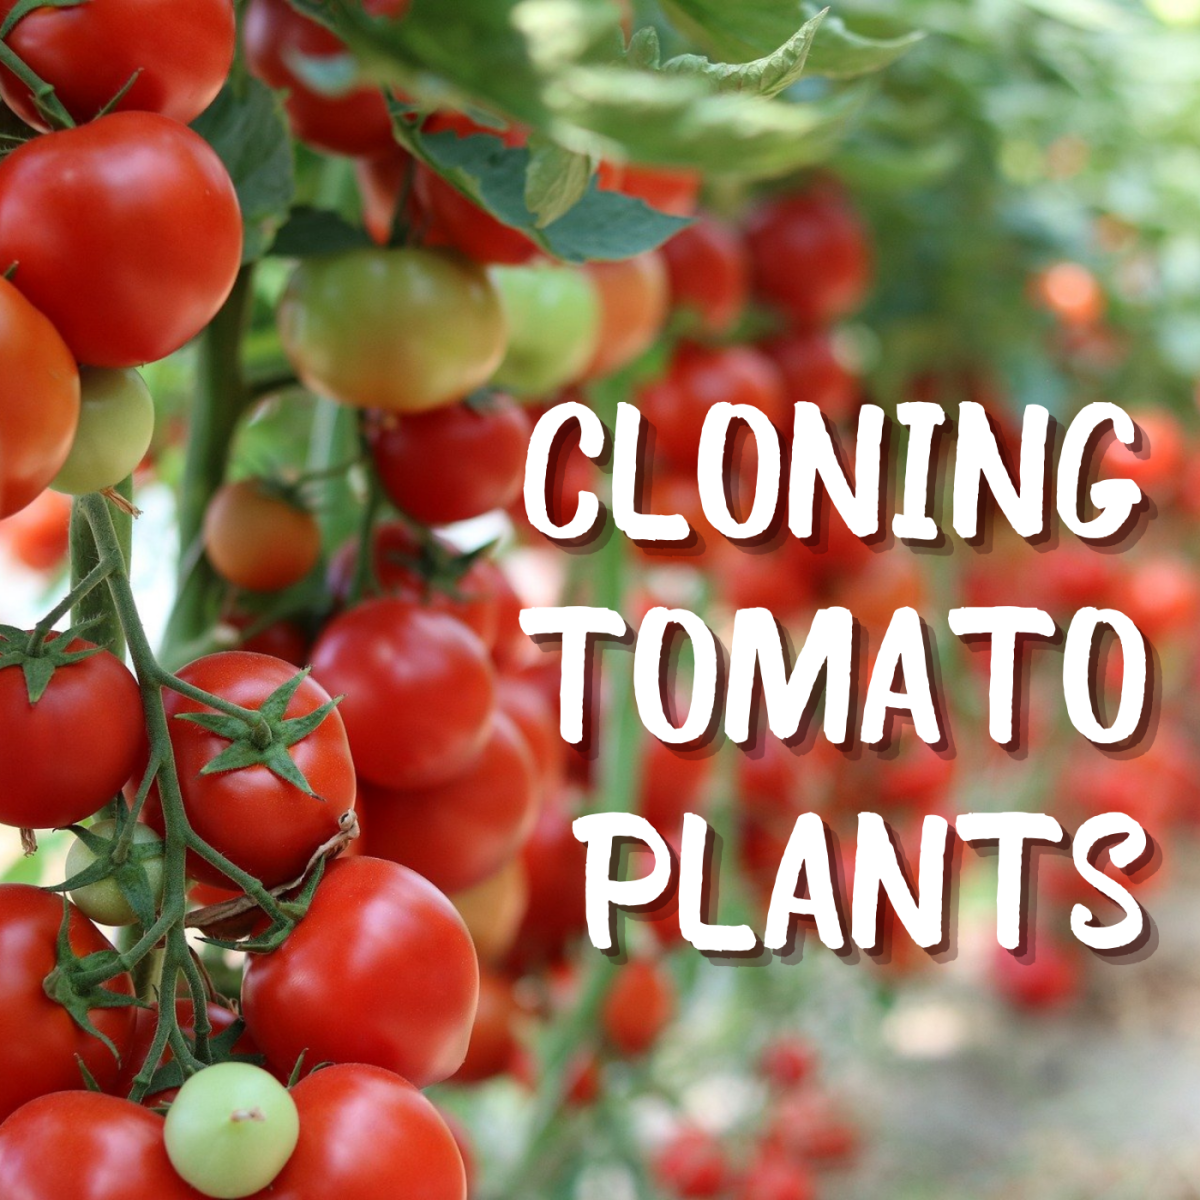 How to Clone Tomato Plants From Cuttings in Water